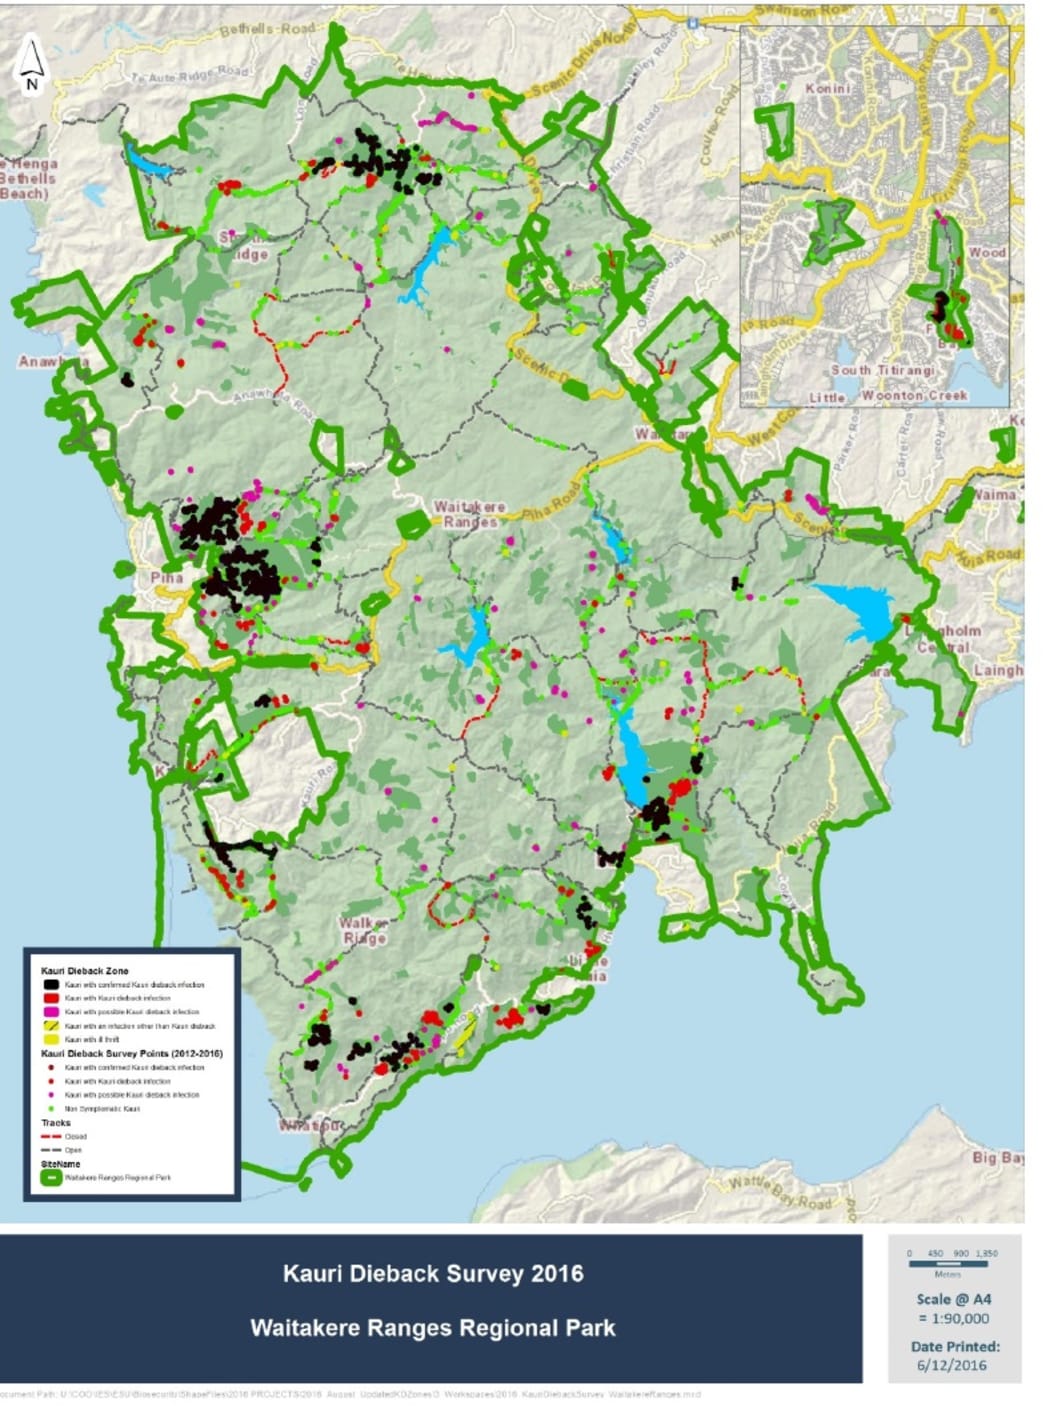 A map showing kauri and kauri dieback distribution within the Waitakere
Ranges Regional Park 2016.